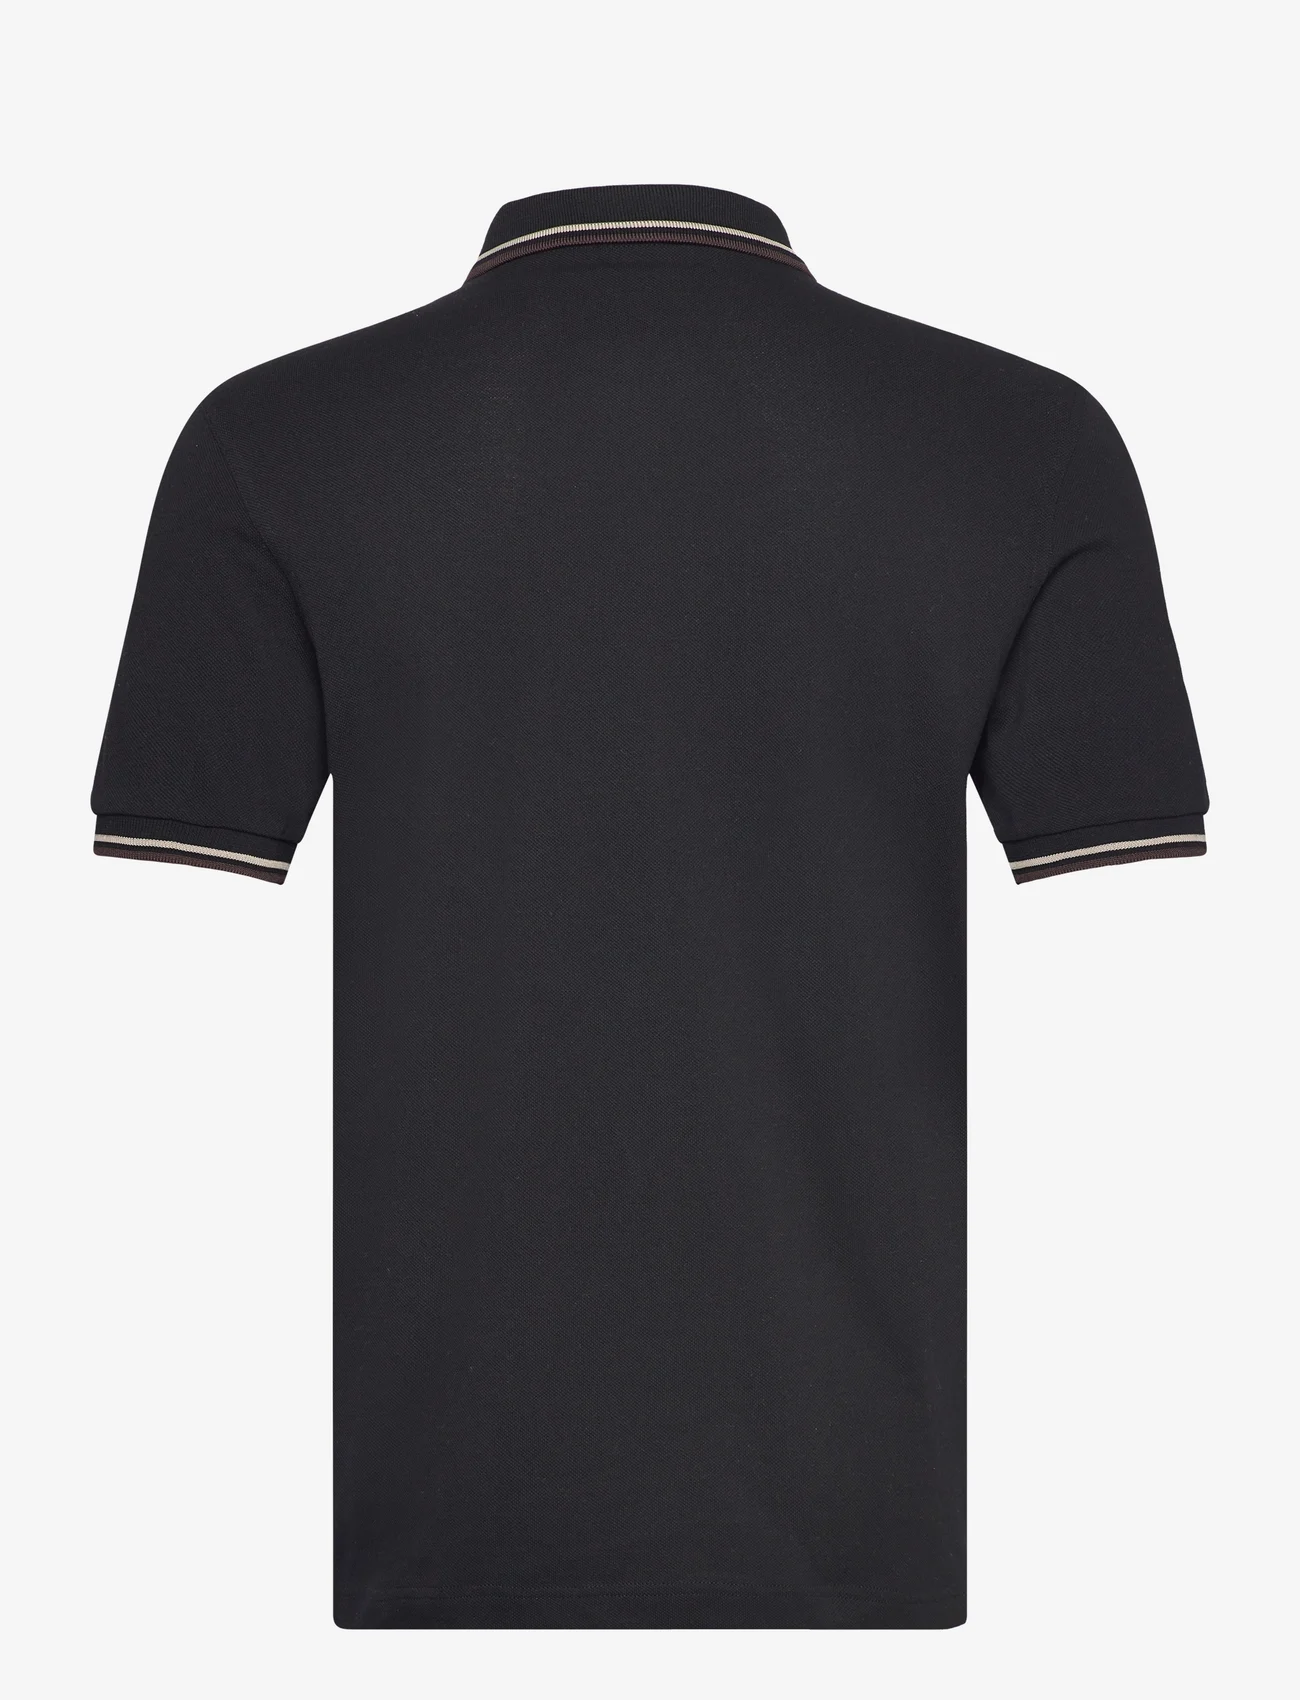 Fred Perry - TWIN TIPPED FP SHIRT - kortærmede poloer - blk/wrmgre/brick - 1